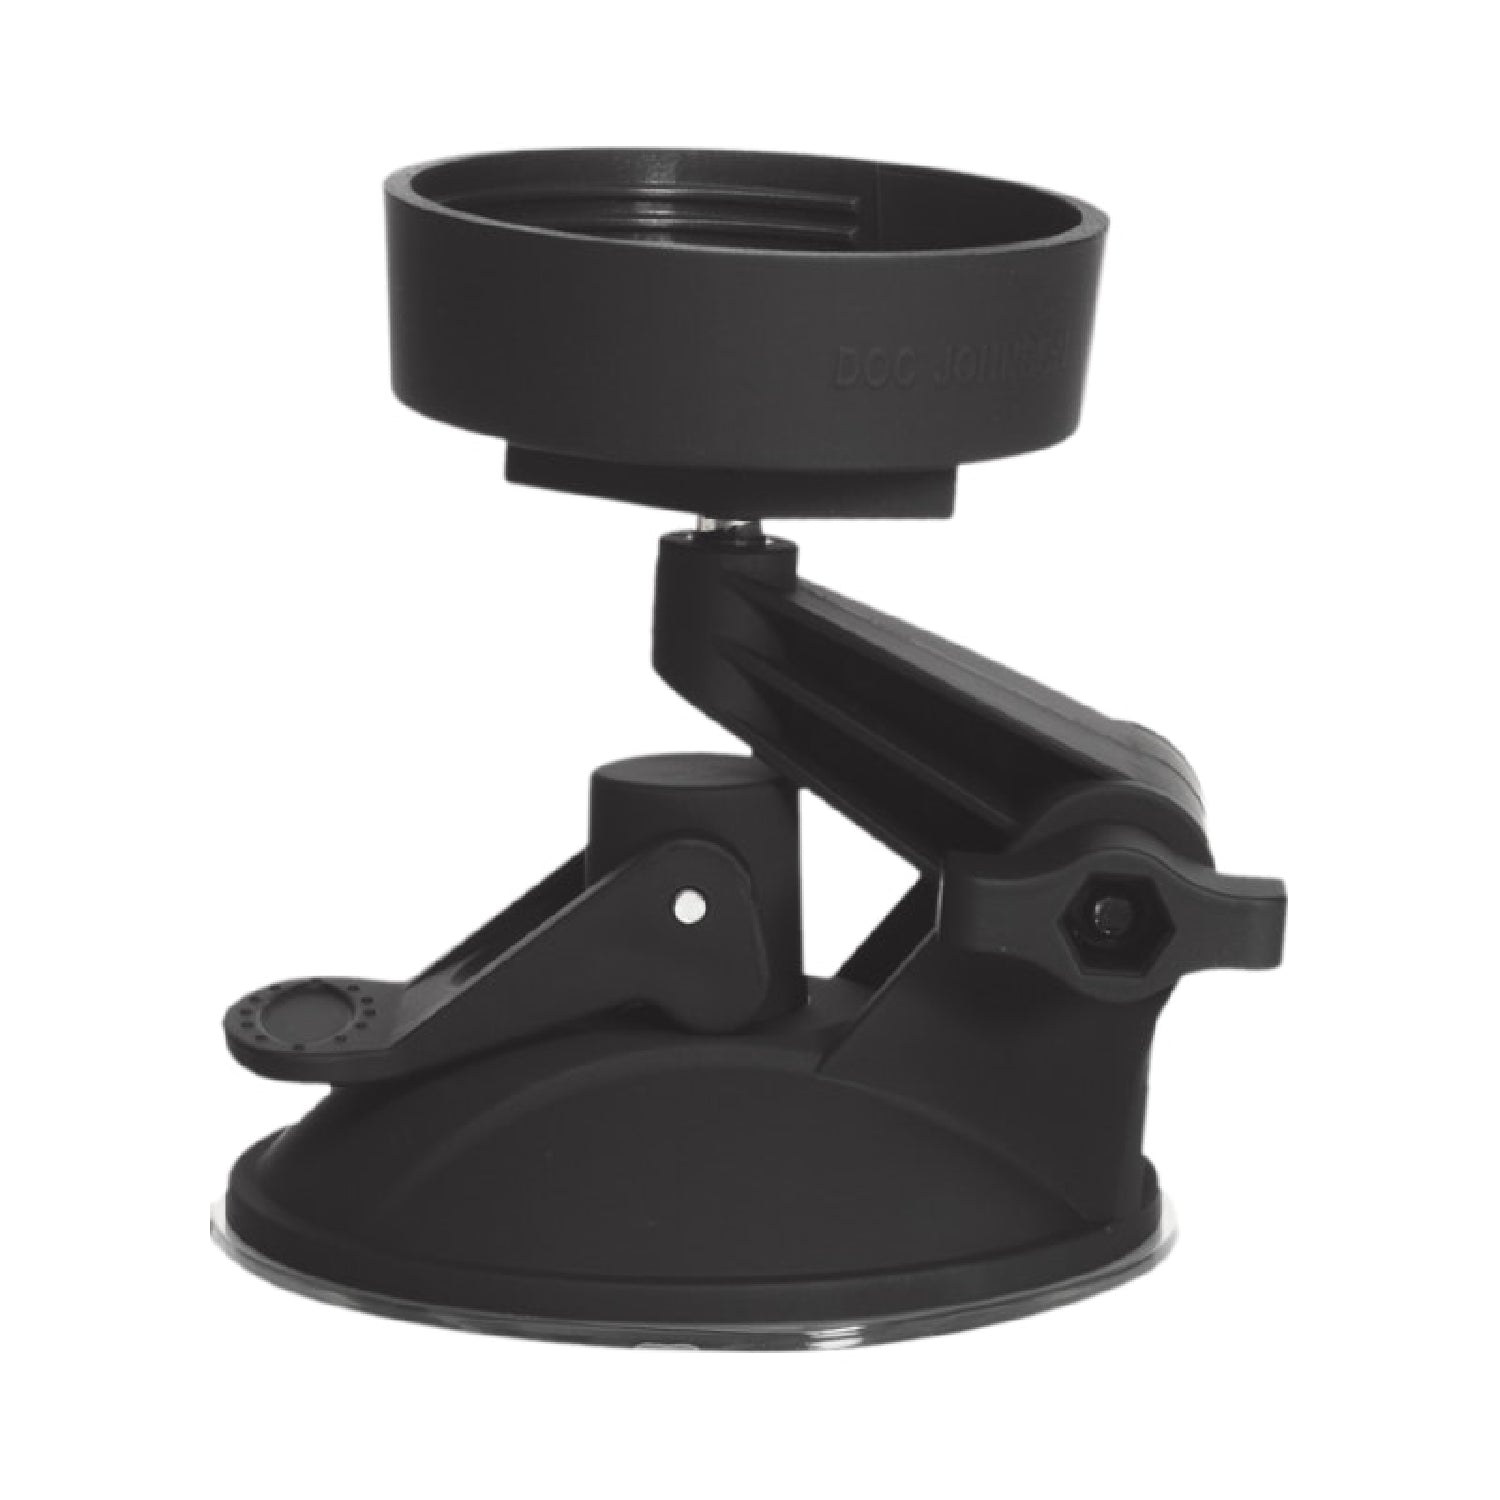 Main Squeeze - Suction Cup Accessory - Black